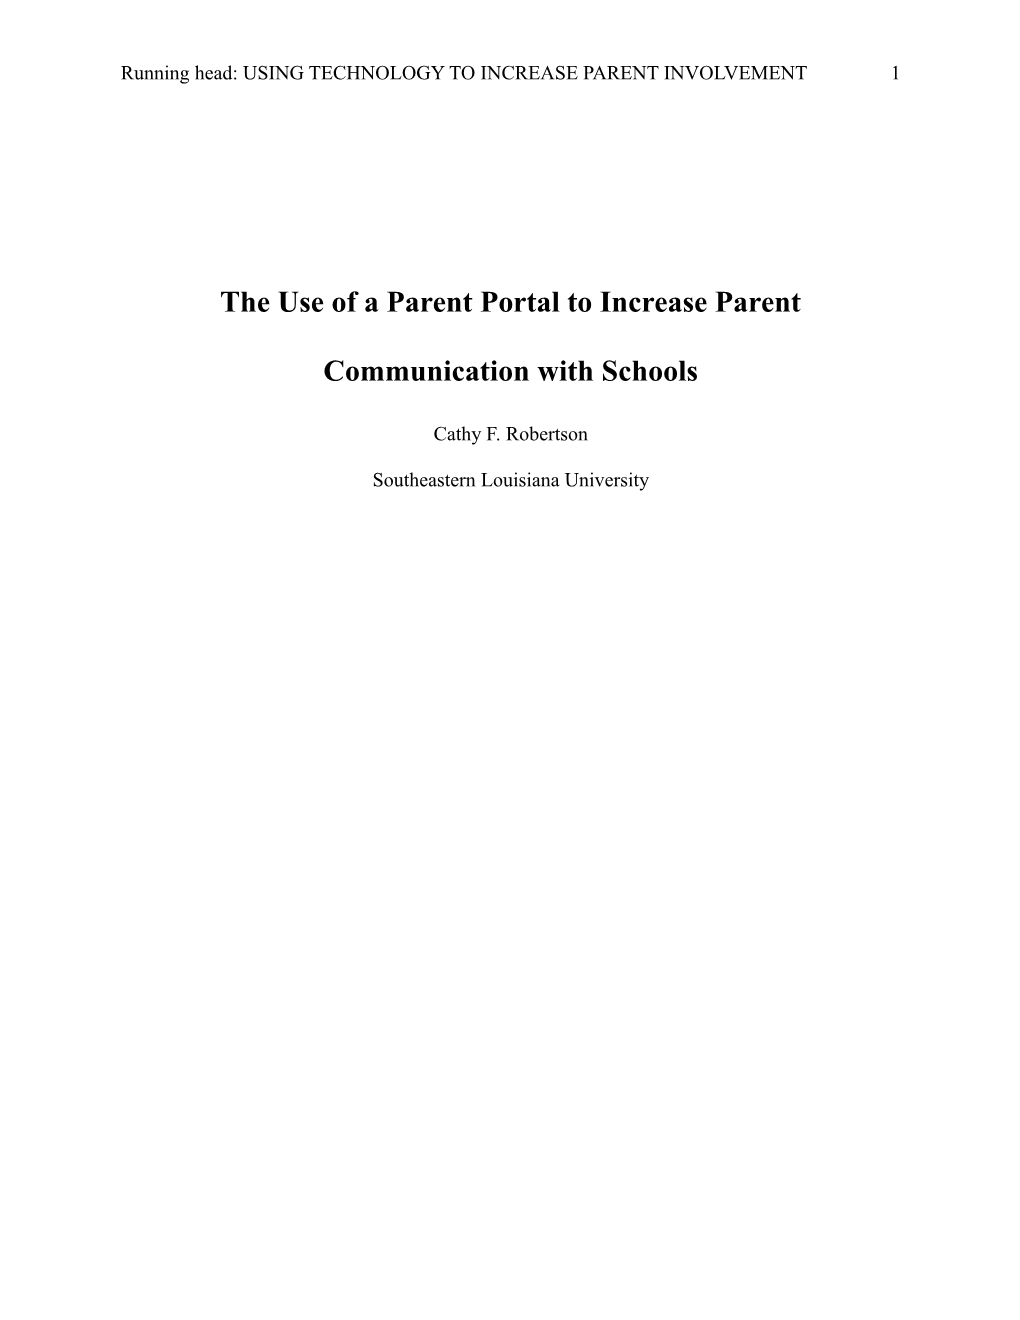 The Use of a Parent Portal to Increase Parent Communication with Schools